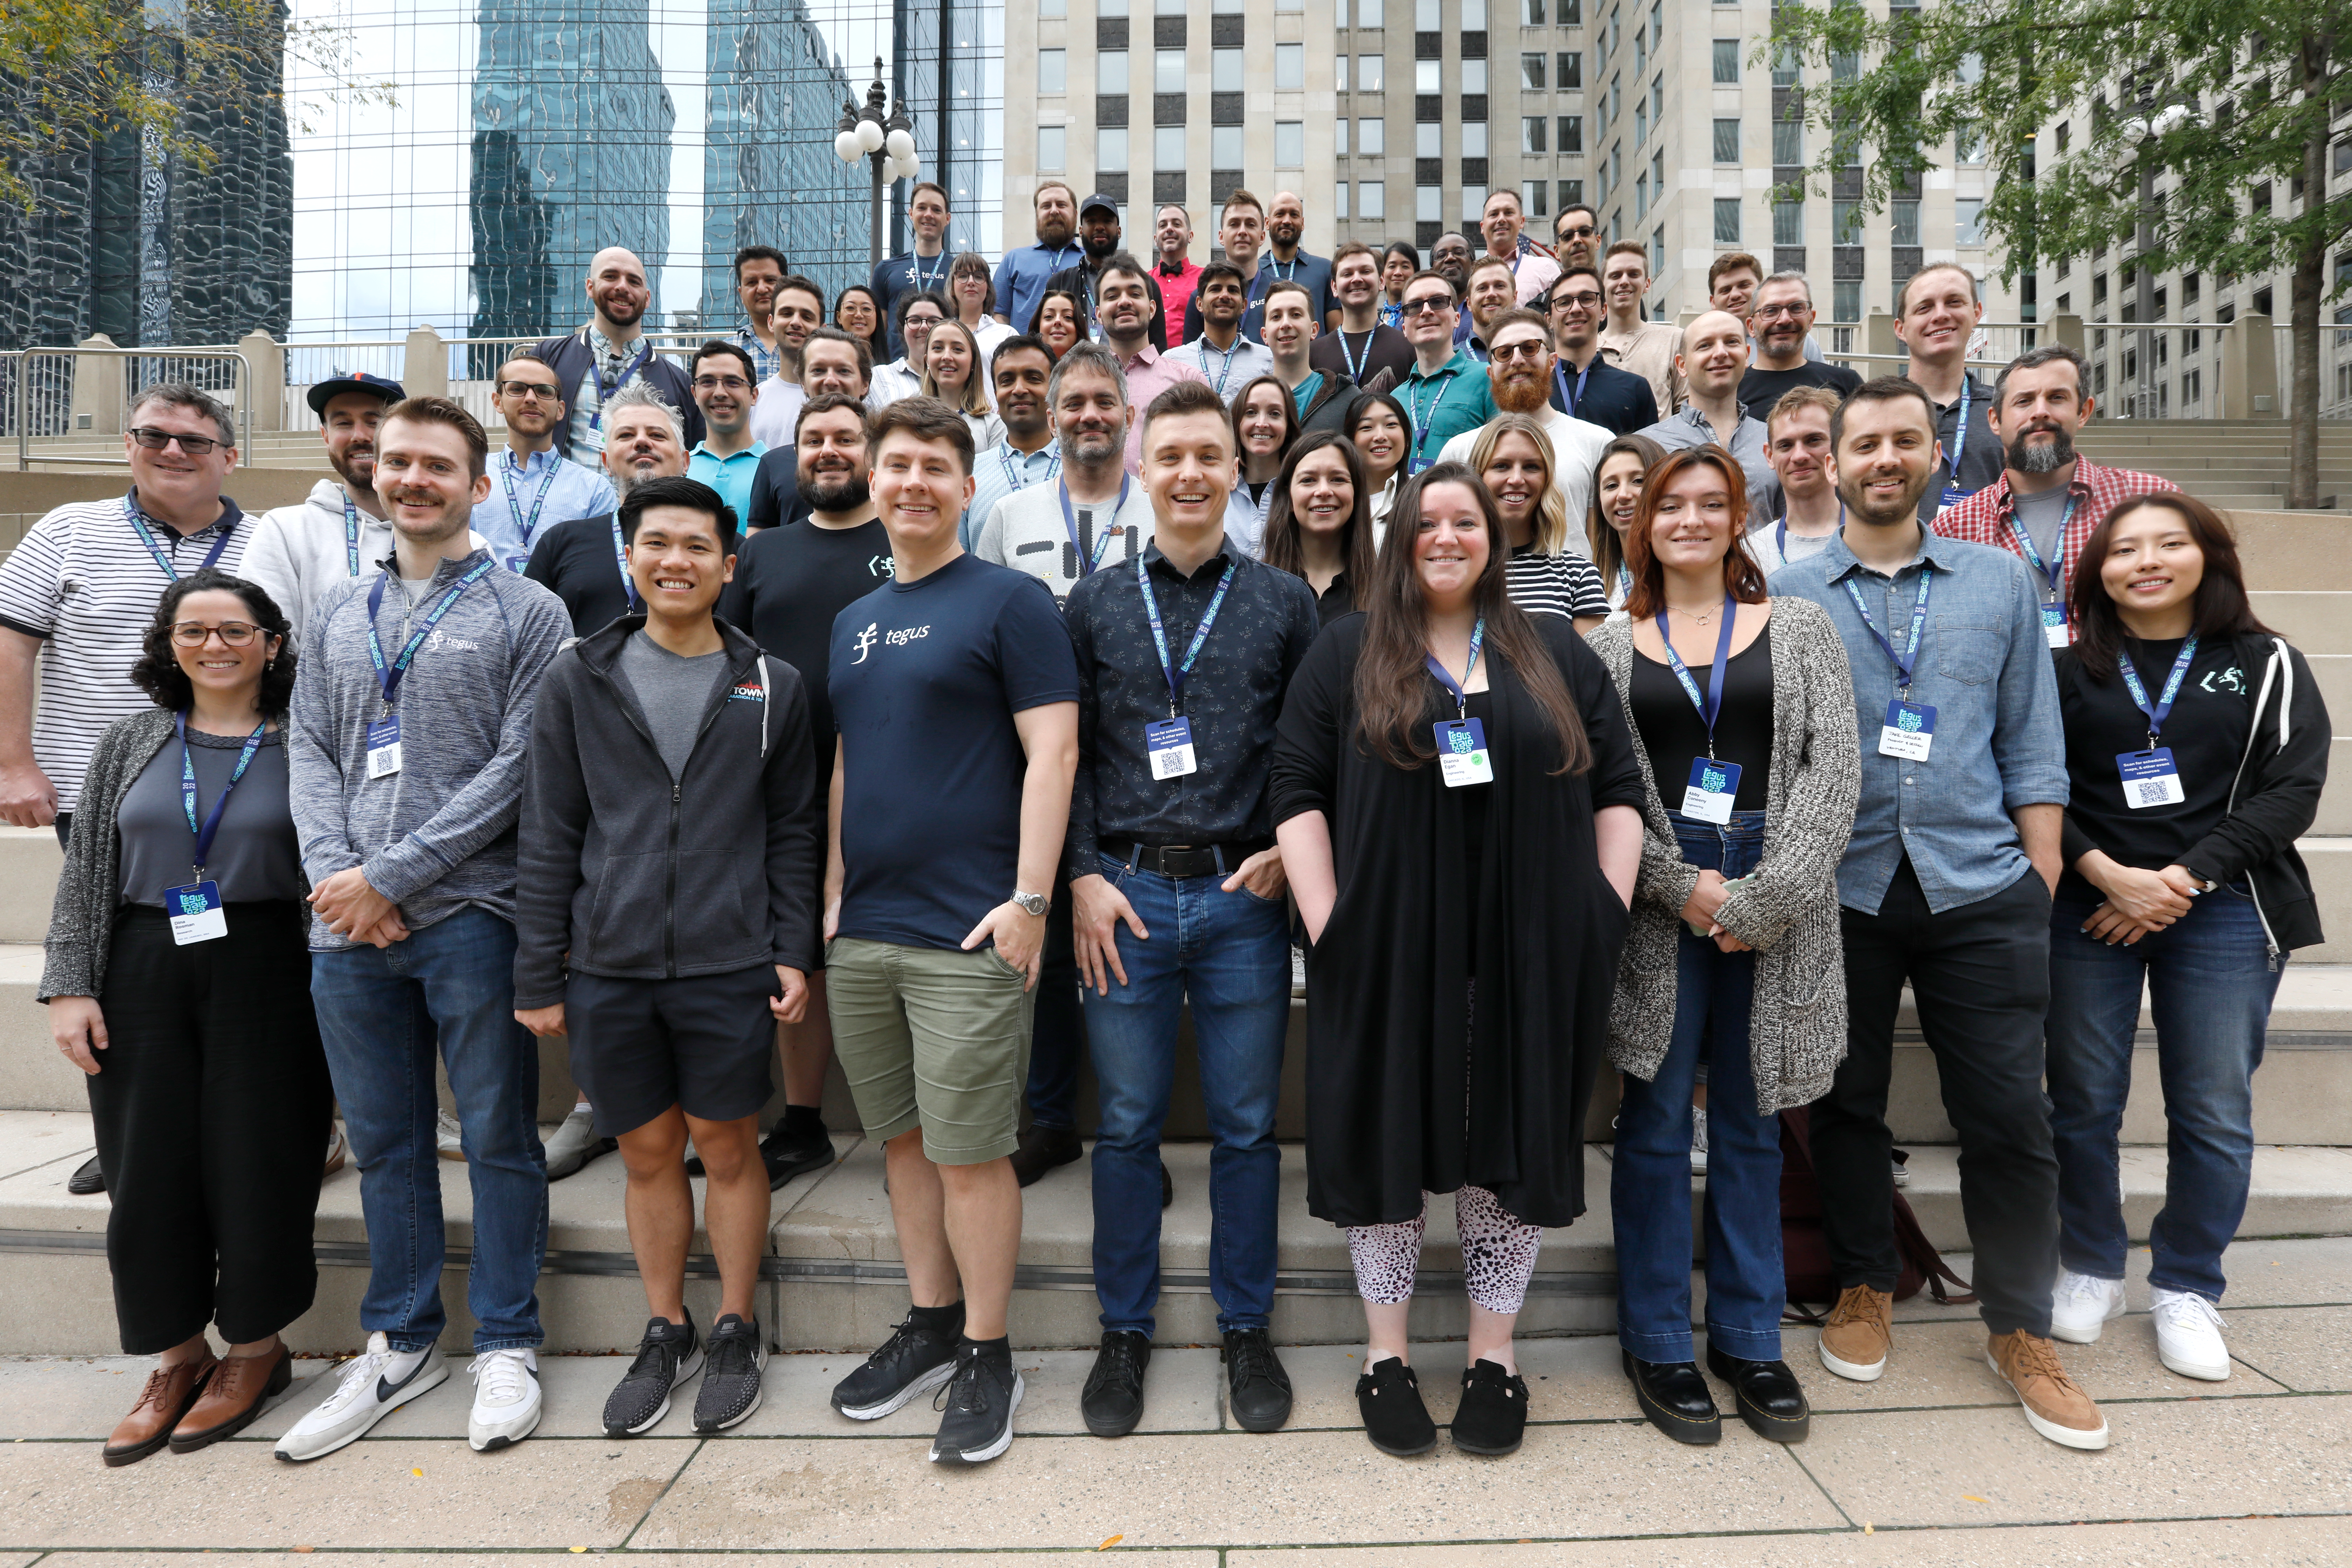  Large group photo of Tegus team on outdoor steps amid city buildings. 